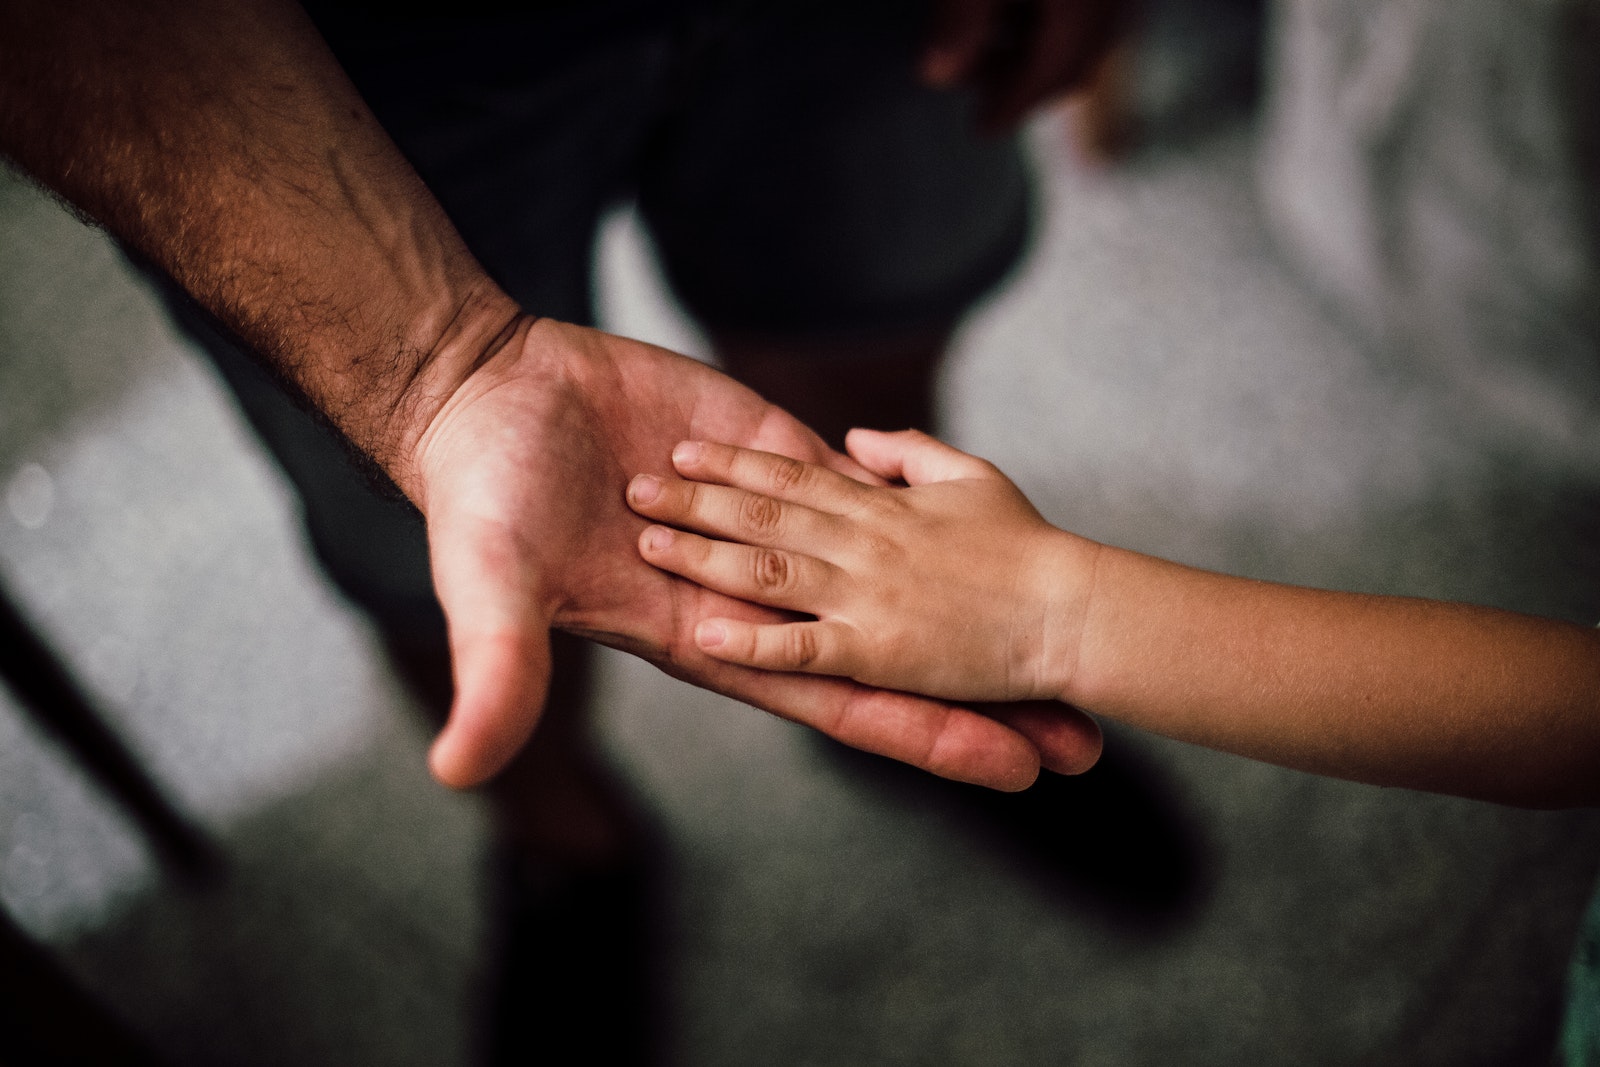 Father and Child's Hands Together